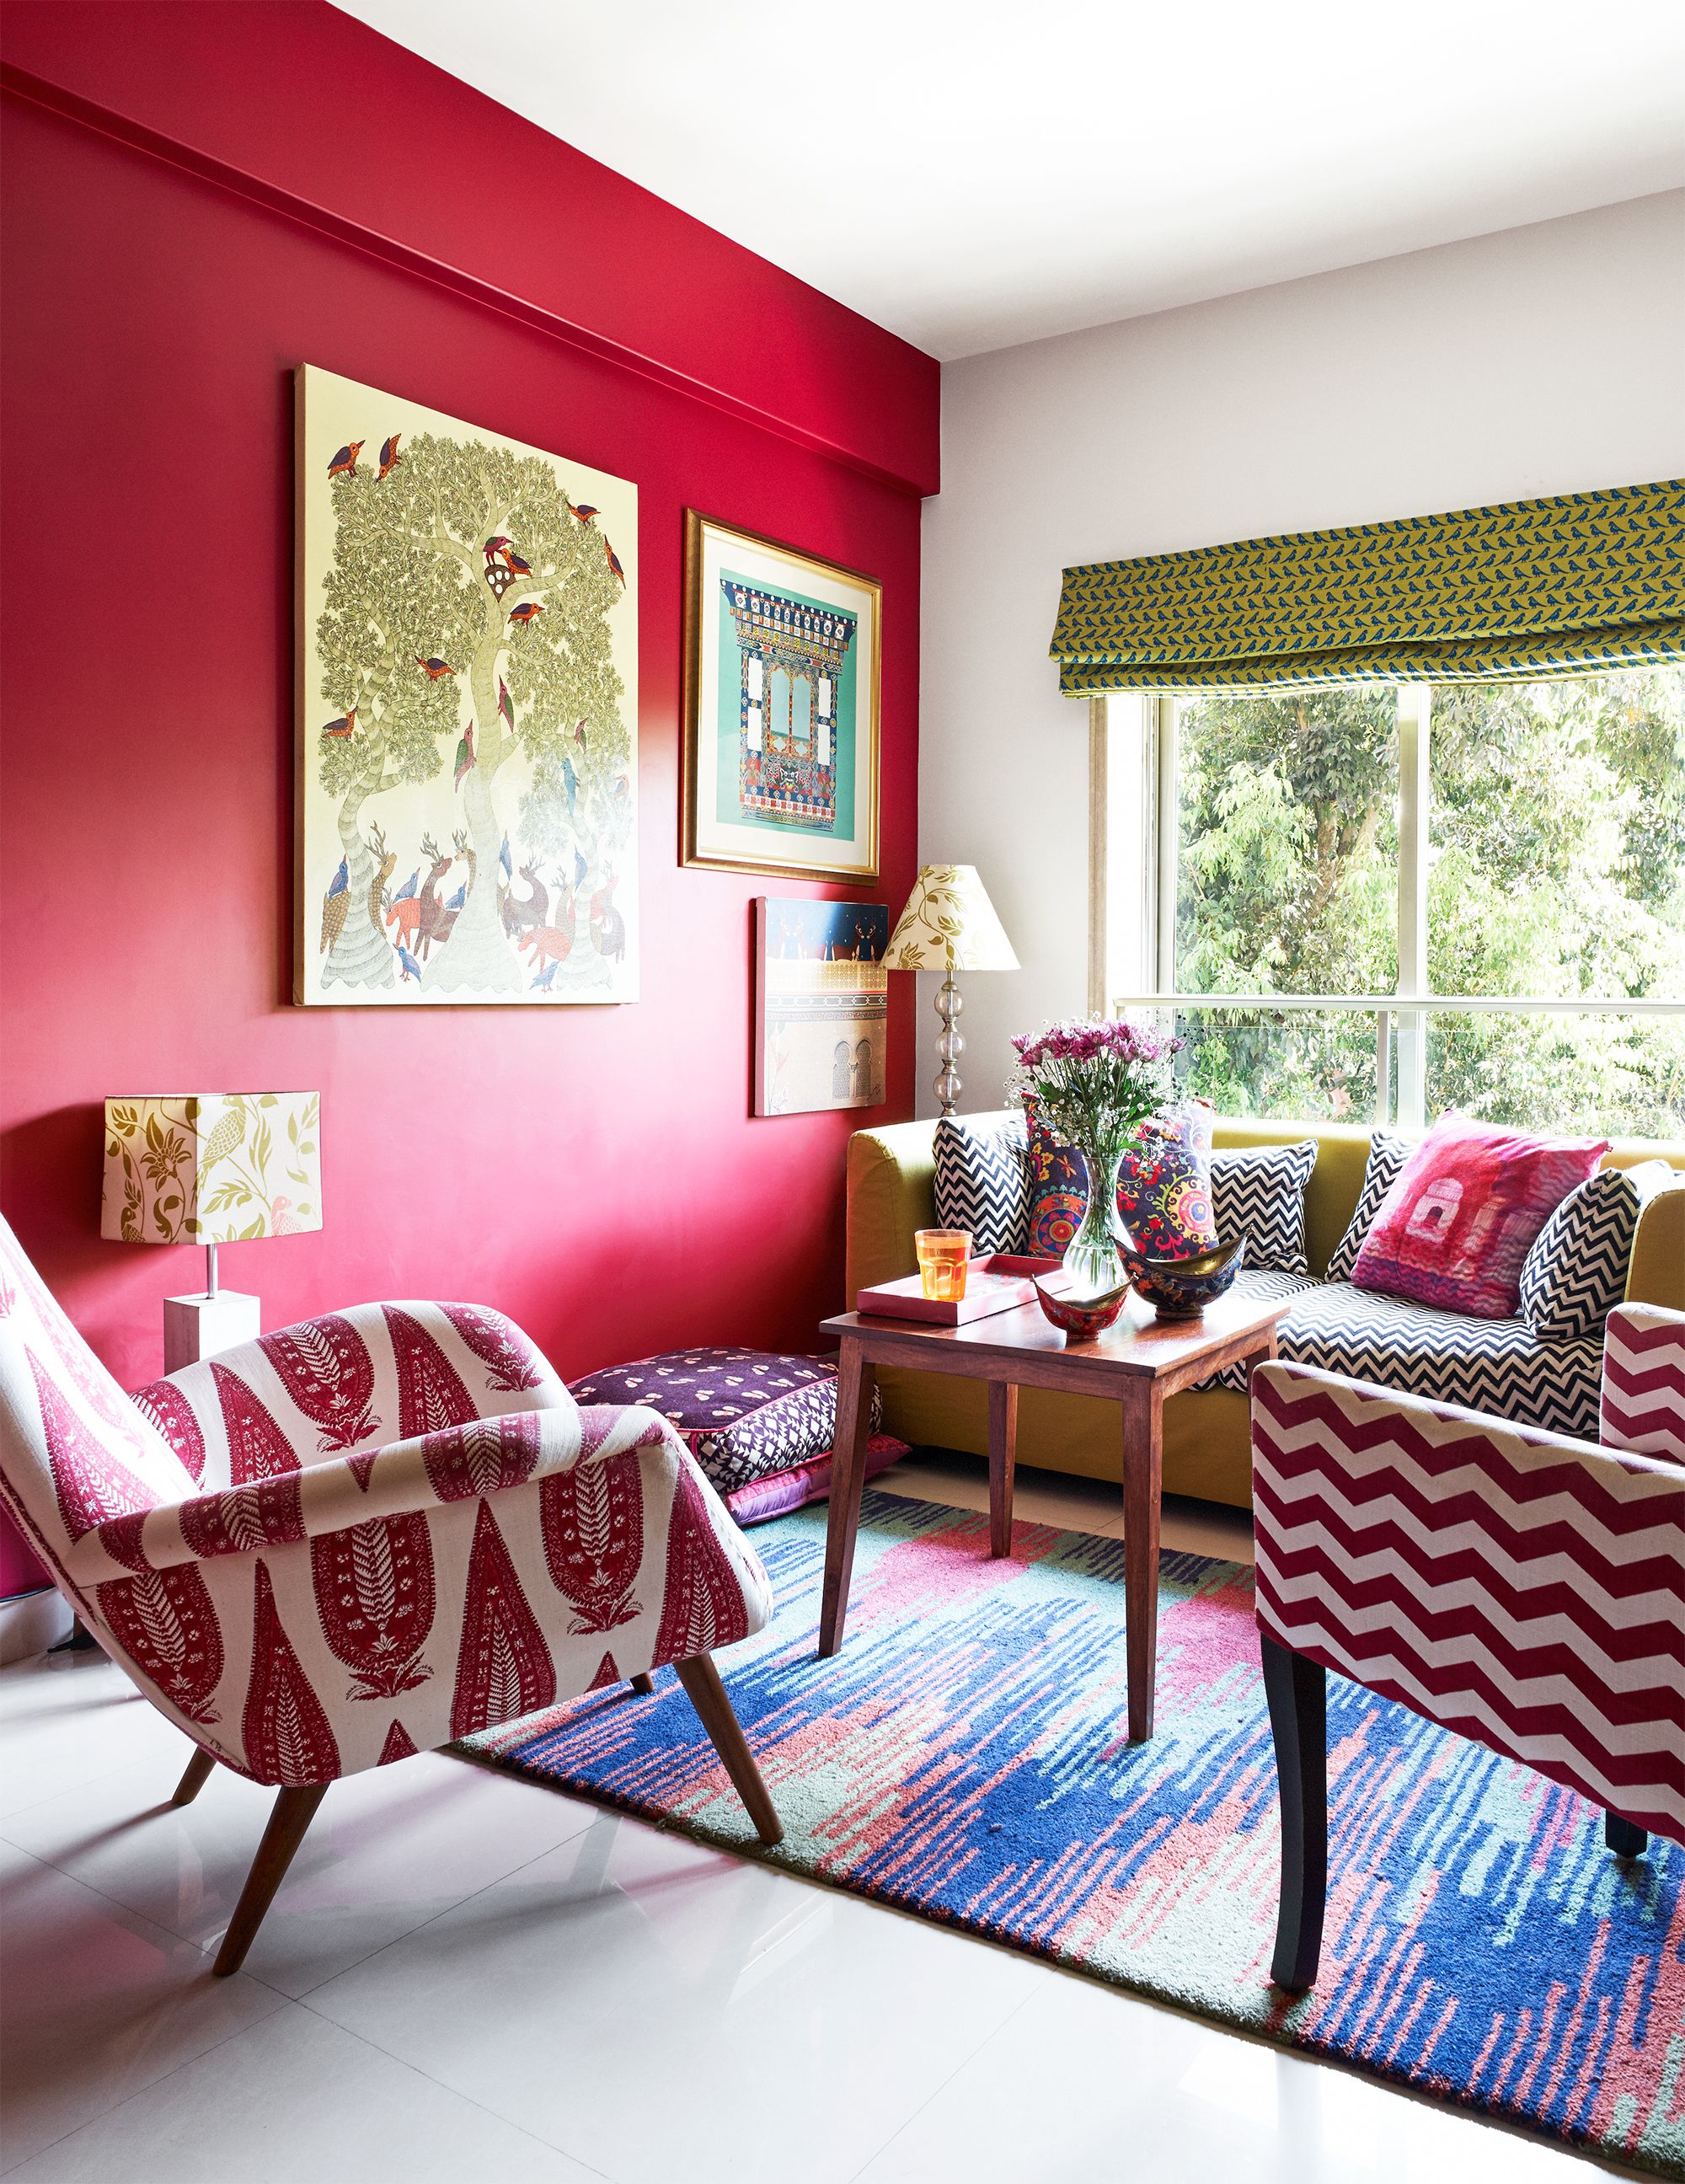 Small Living Room Color Ideas: Create A Vibrant Look With Colors